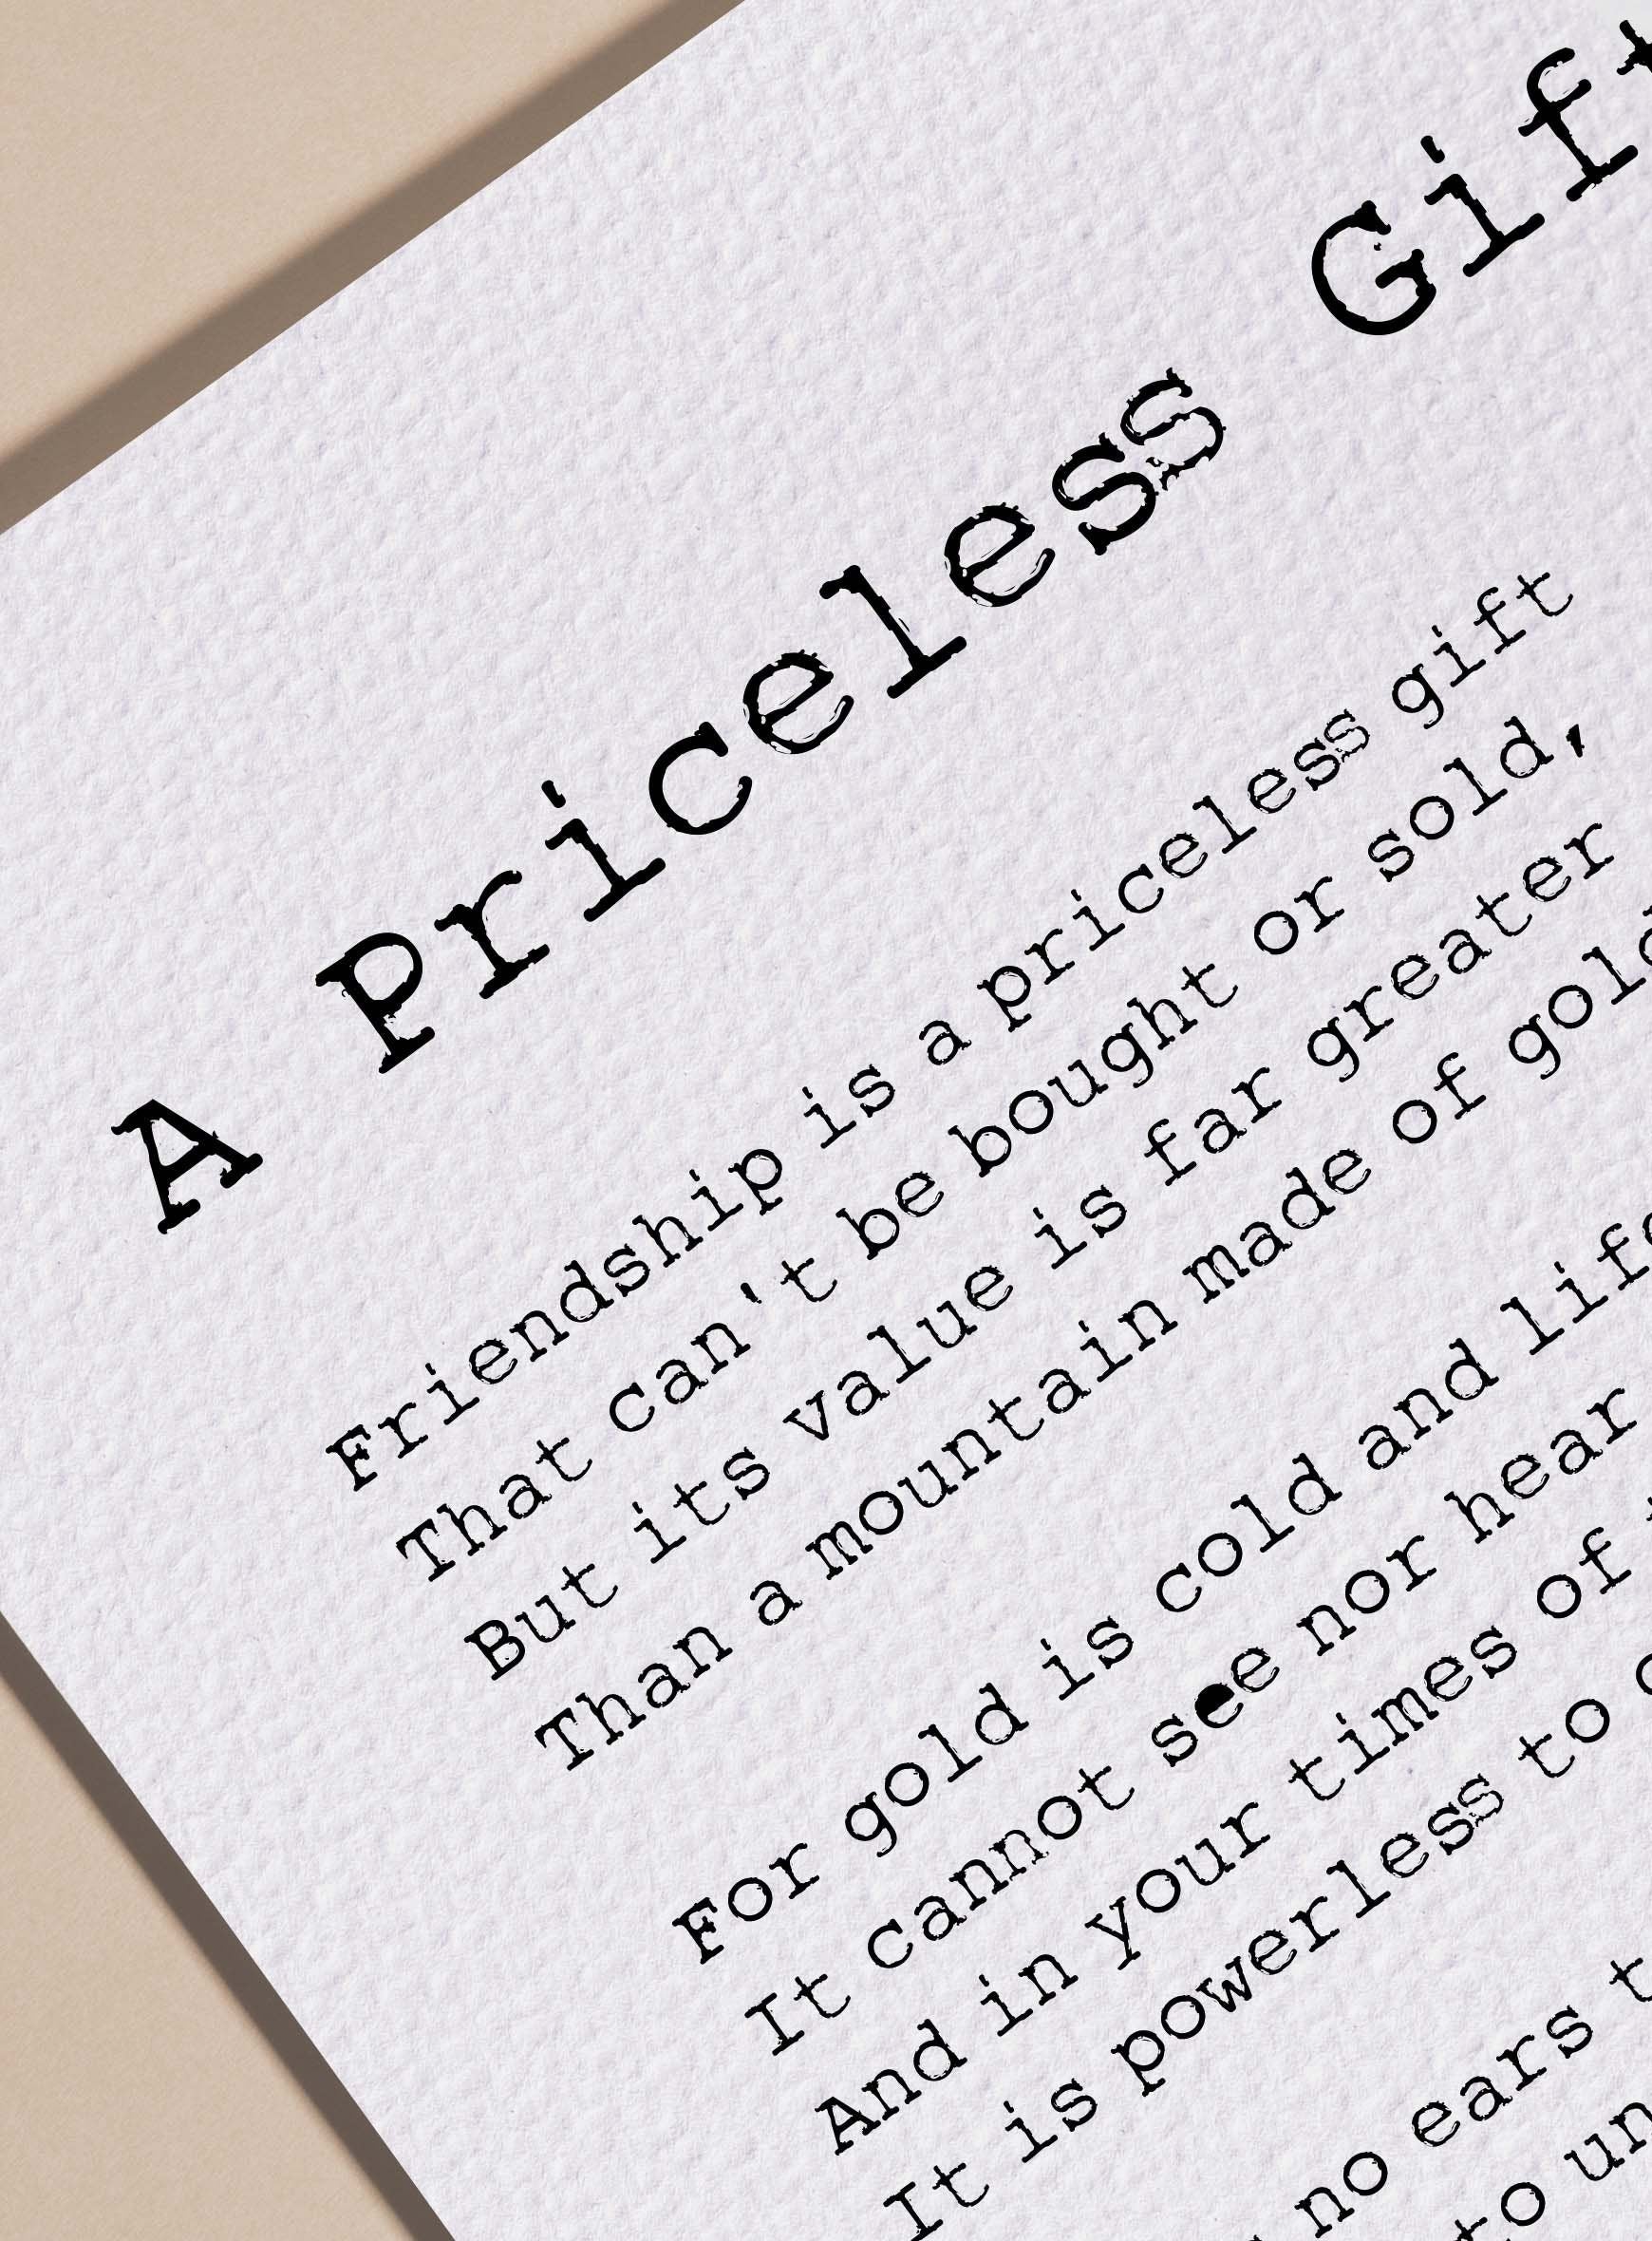 Friendship Gift - A Priceless Gift Bestie Poem Framed Poster for Friend - Gift for a best friend